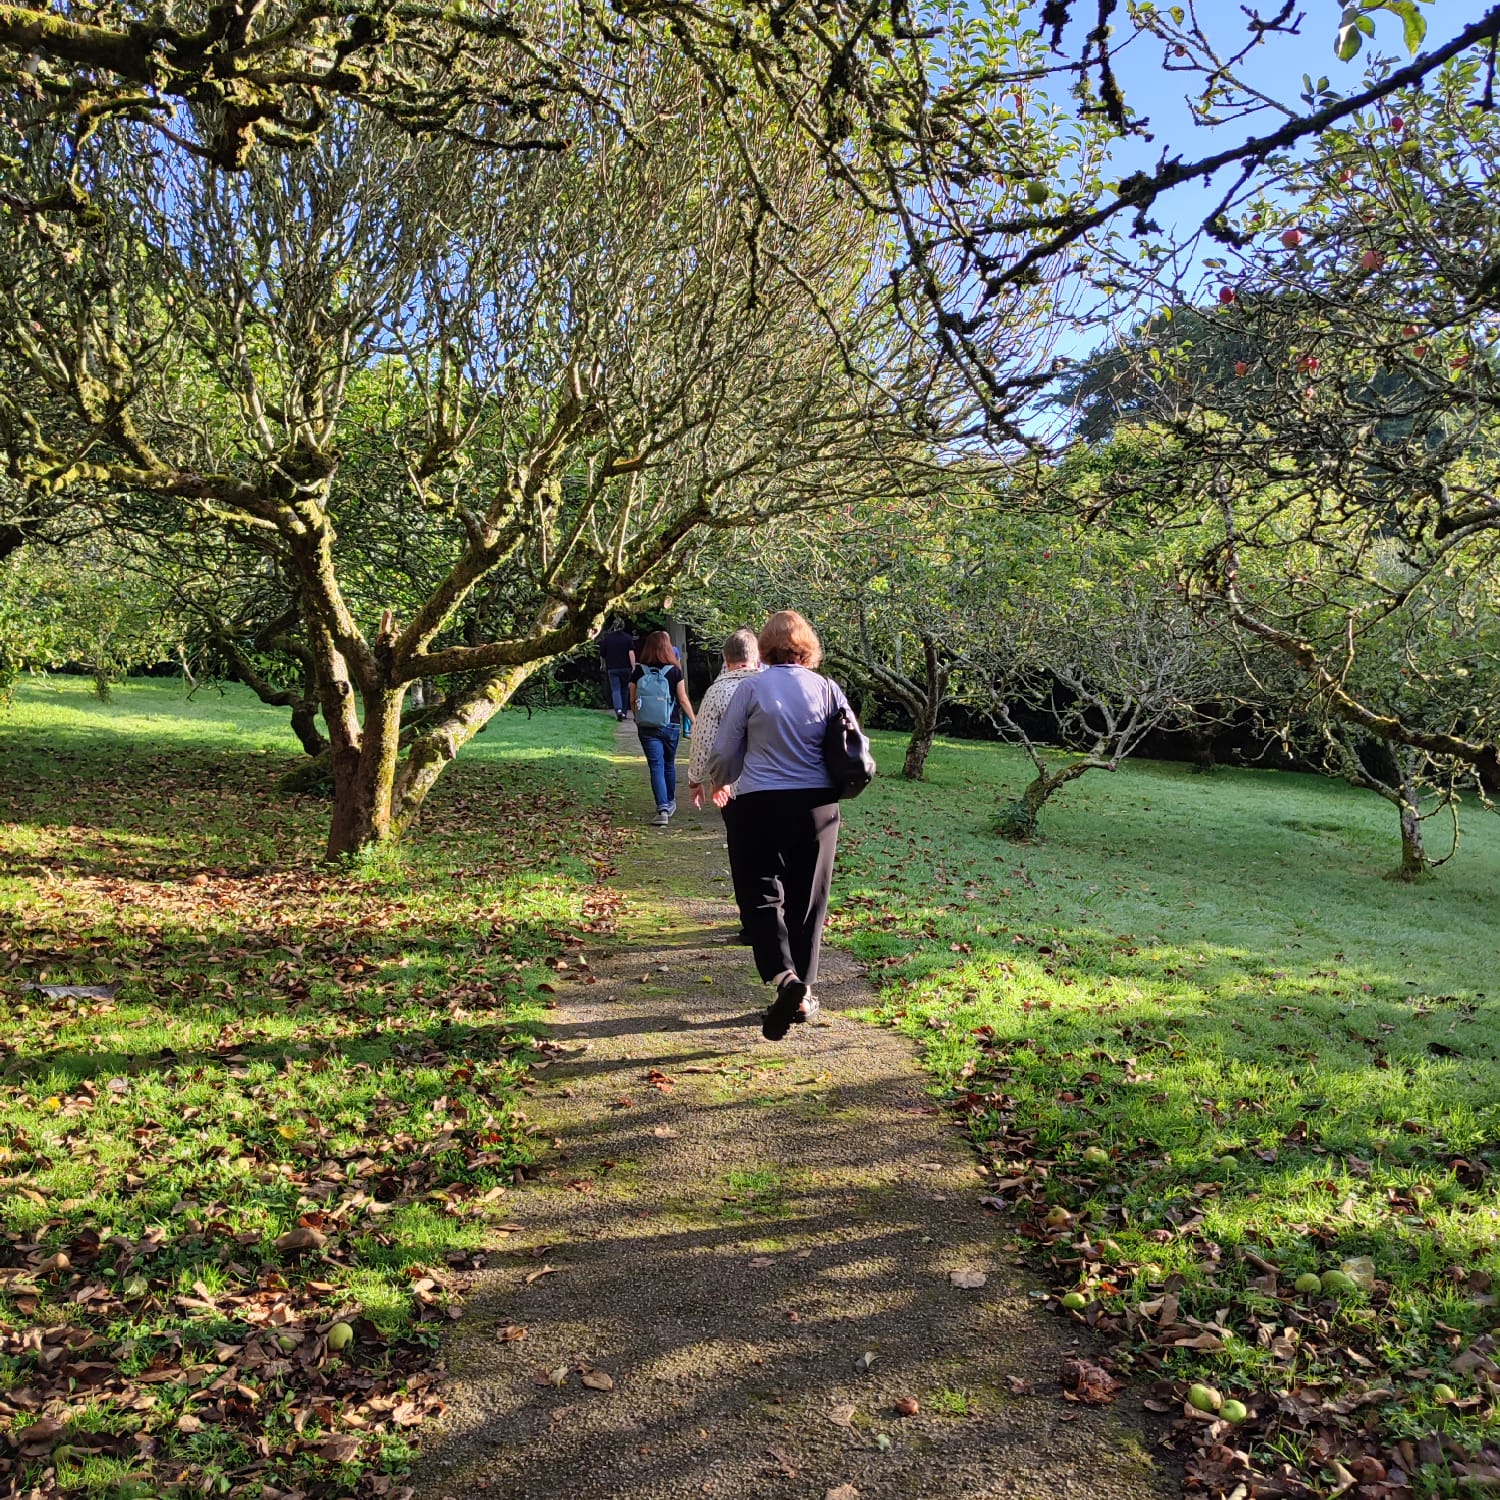 Back view of people under a tree in the afternoon sun, walking through a rural park following the path